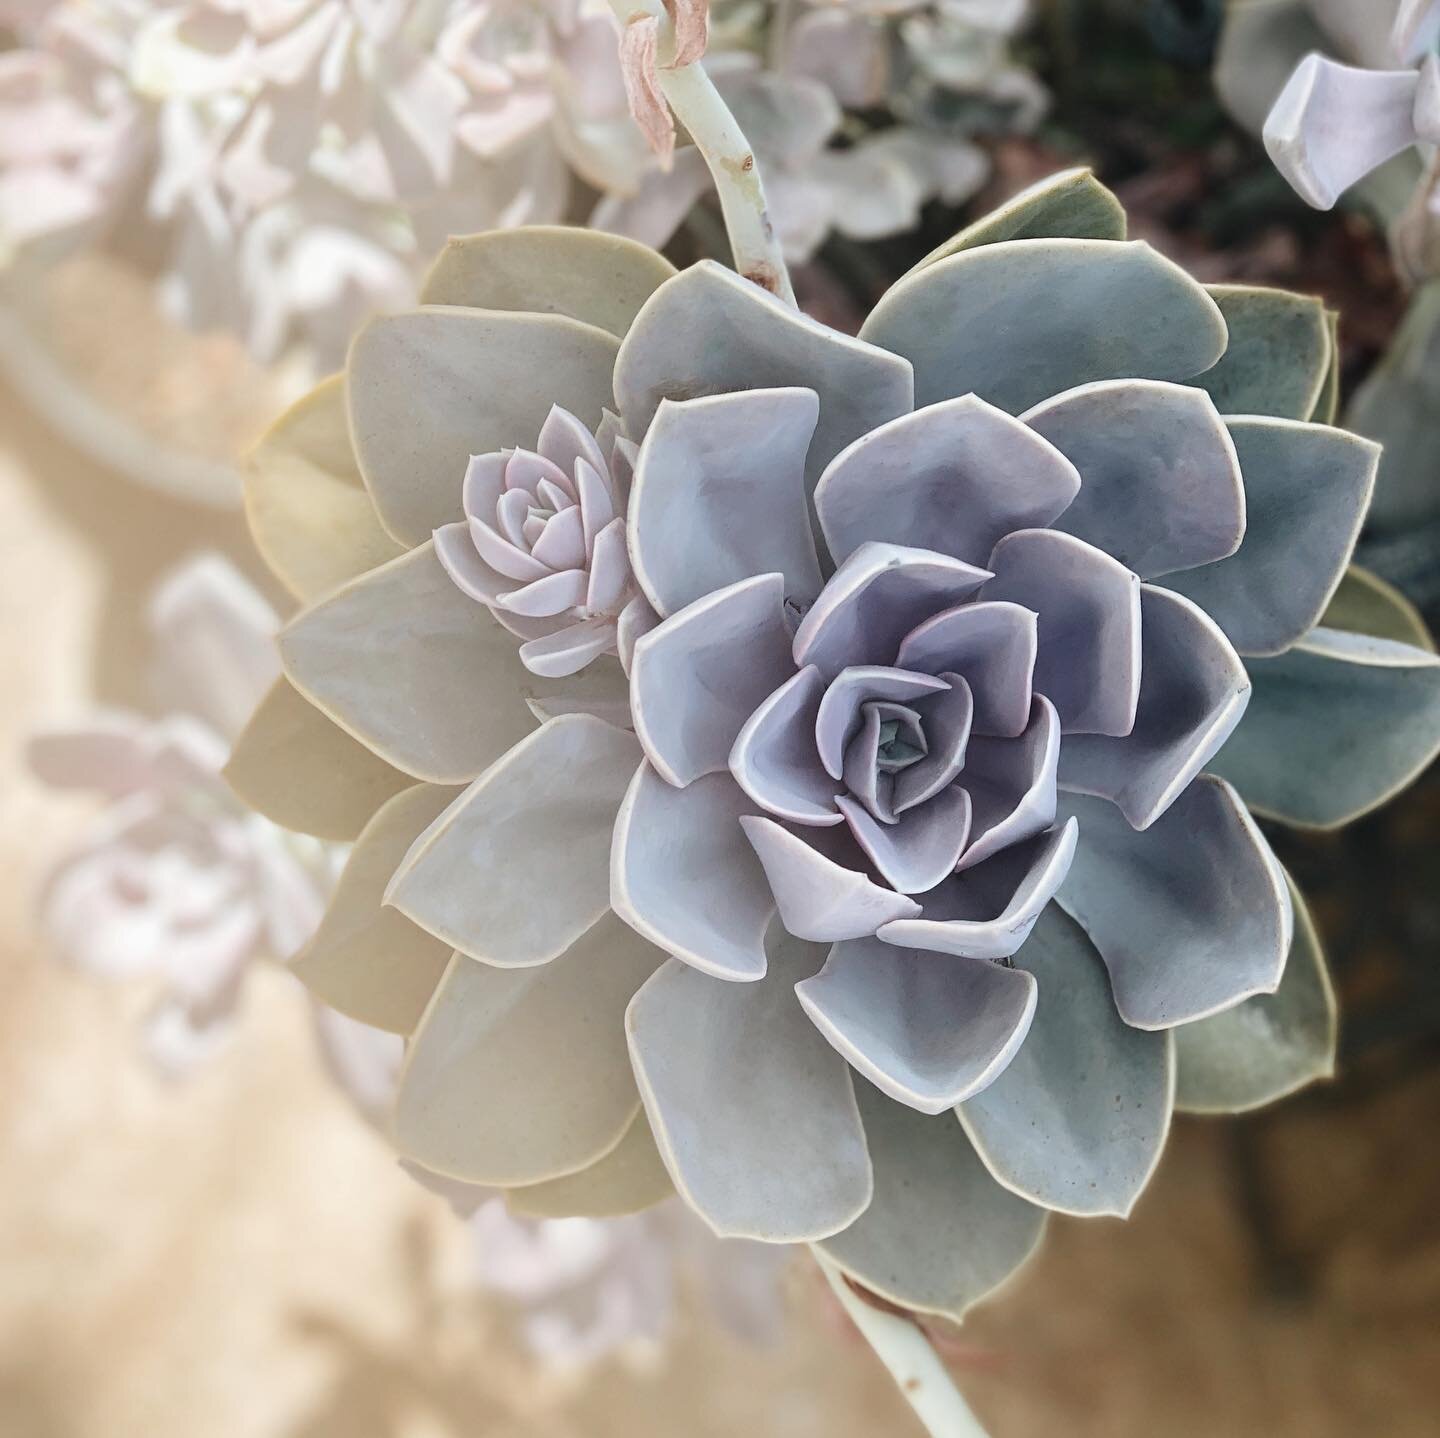 Hi Friends! It&rsquo;s been a while! I randomly took this photo of my friend&rsquo;s mom&rsquo;s Perle and figure this would be a good place to share it. 🤗 Krista and I are thinking about getting back into our succulent hobby... maybe doing some wor